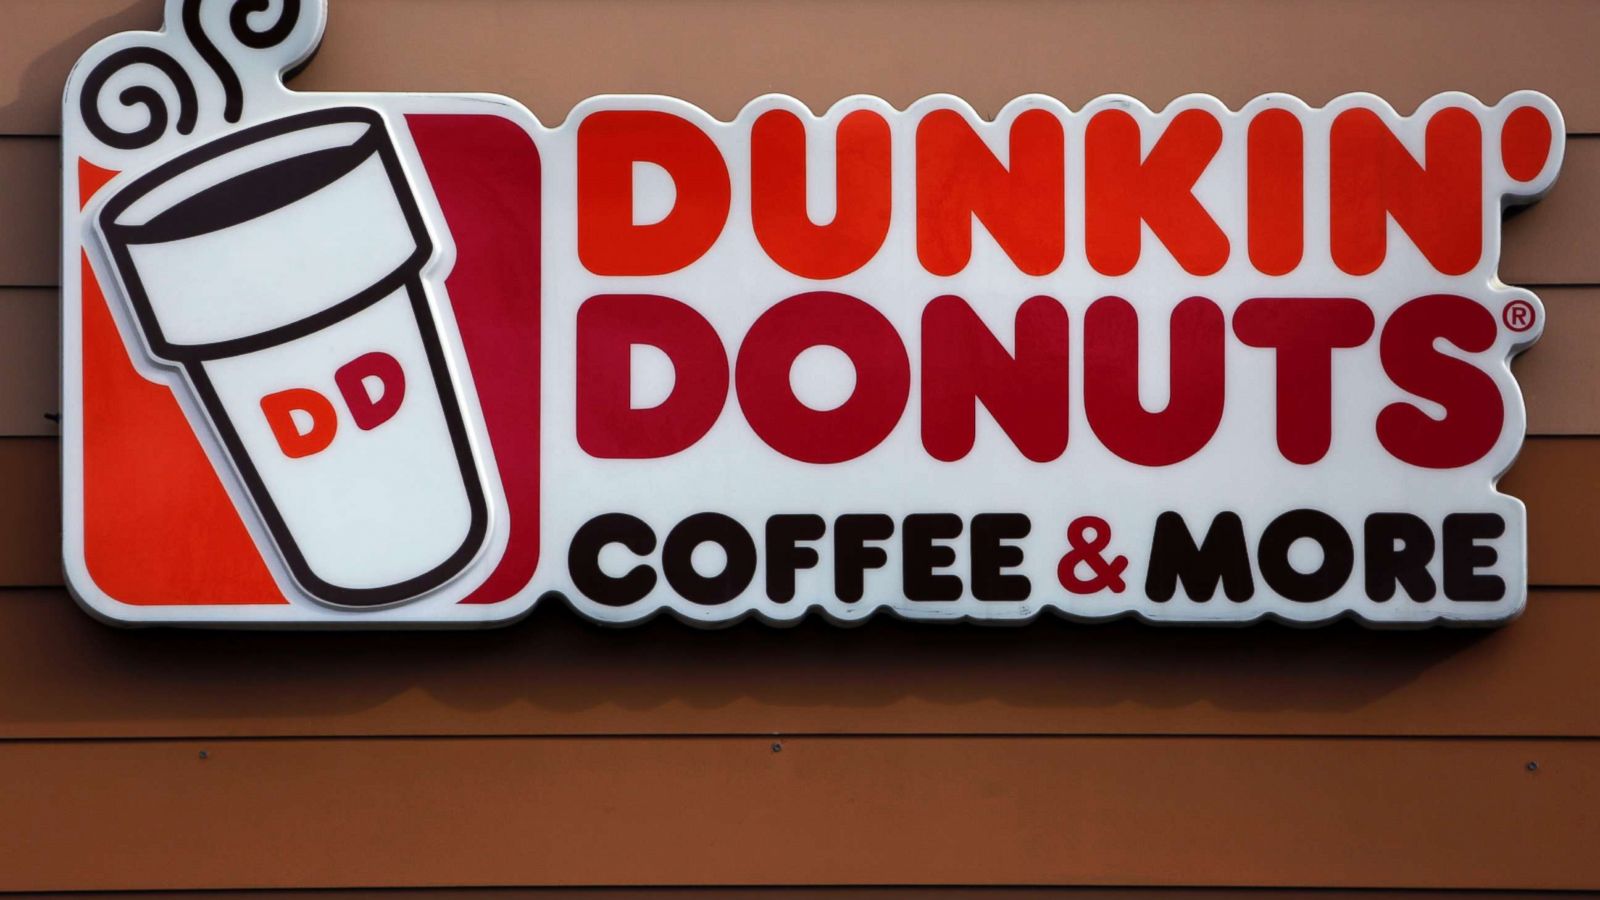 Dunkin' Donuts owner pulls sign asking customers to report workers